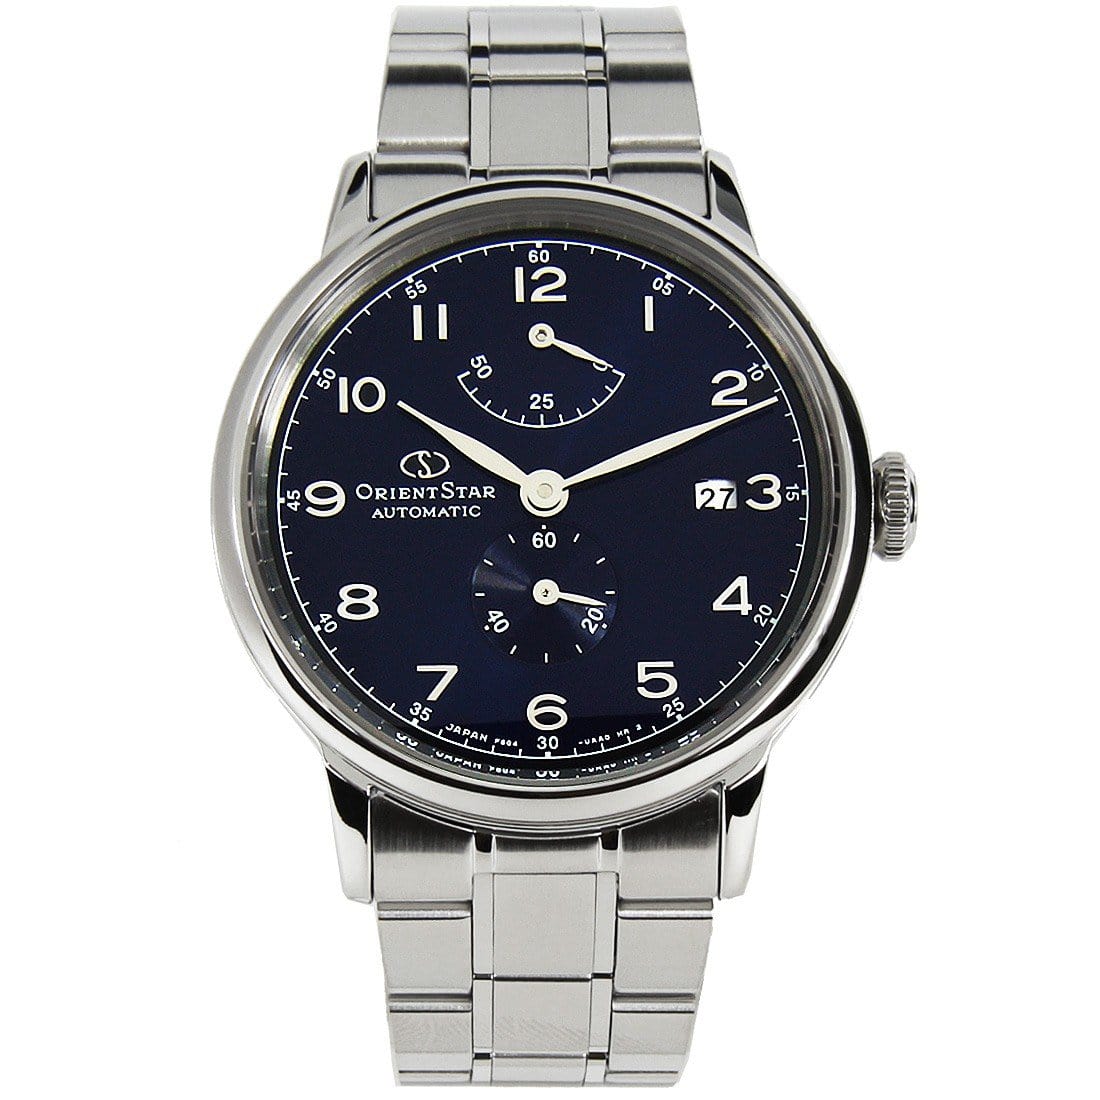 Orient Star Automatic 50M Power Reserve Mens Watch RE-AW0002L00B RE-AW0002L